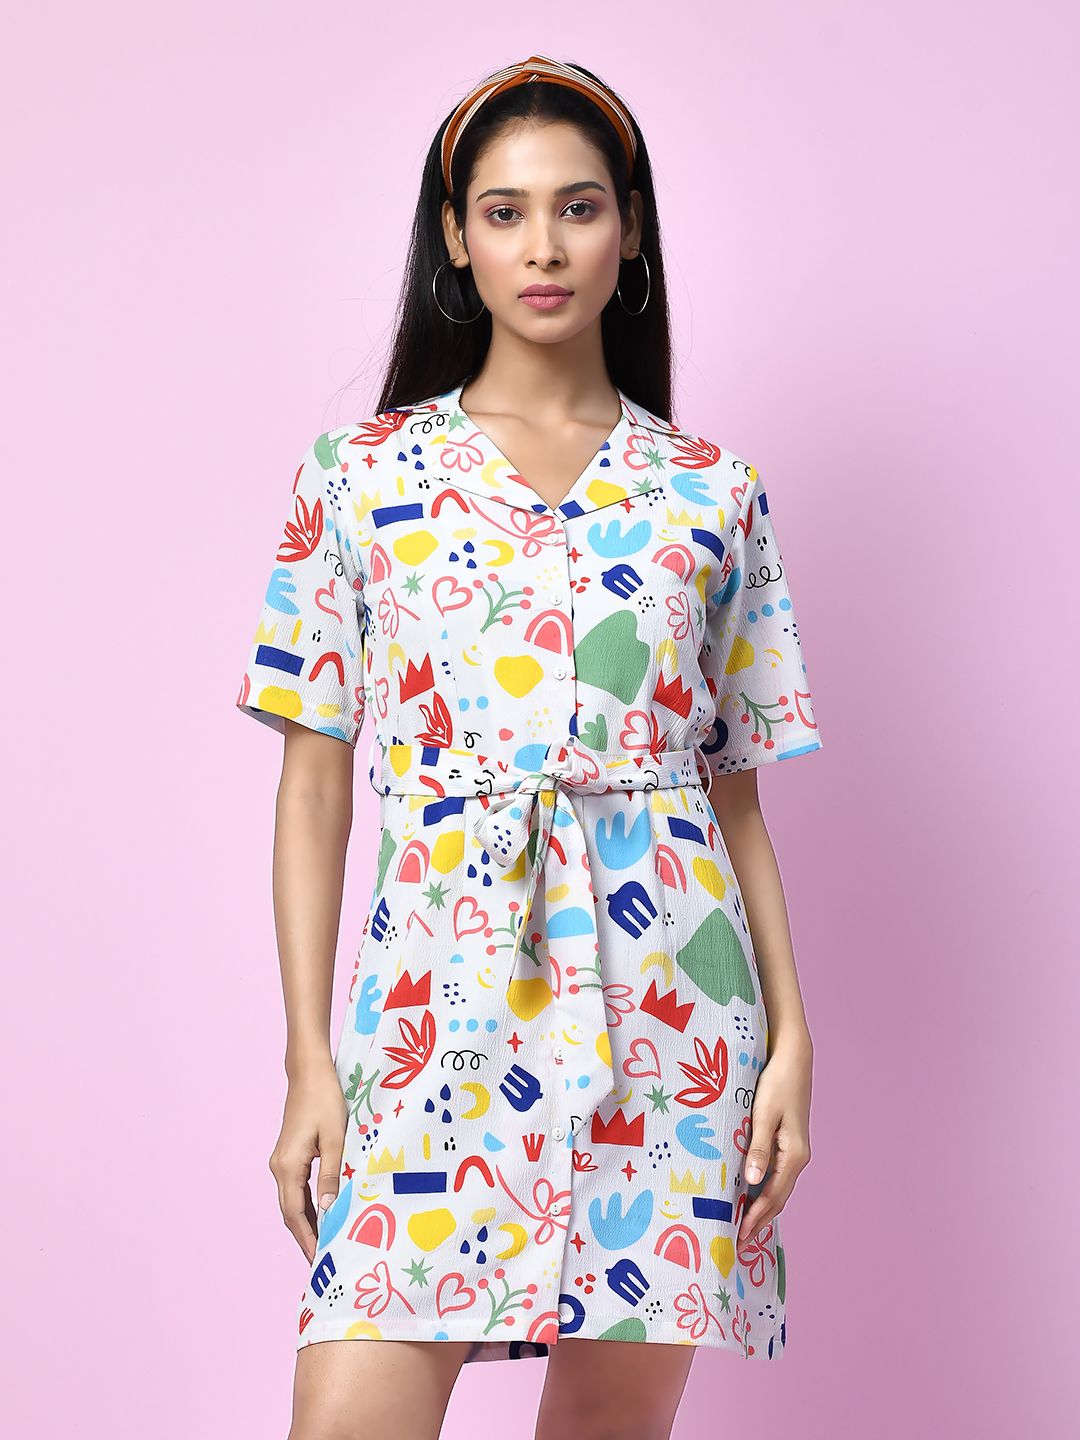 Zink London Women's White Quirky Prints Shirt-Styled Short Dress - D06000 - 2